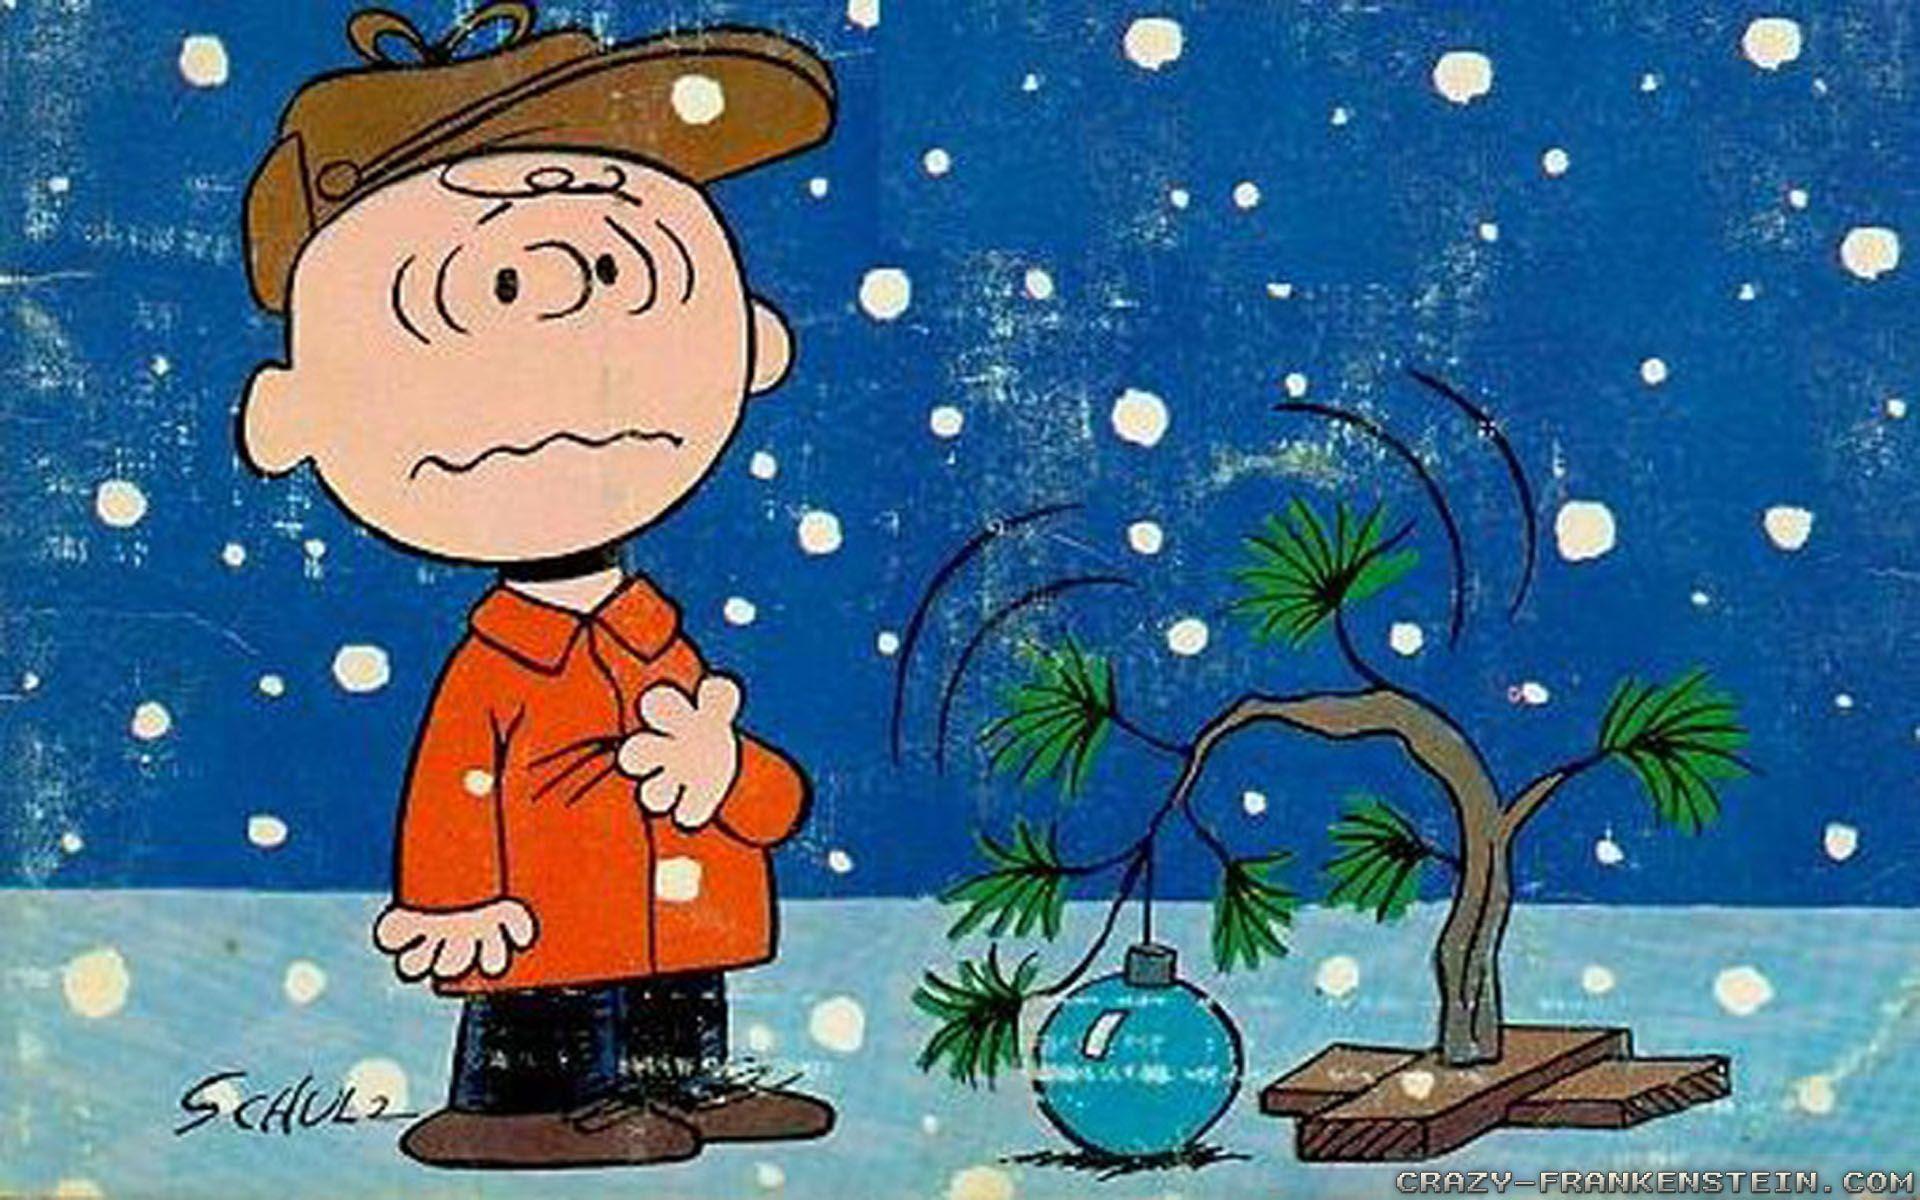 Charlie Brown stands in the snow with a sad look on his face as he looks at a small tree with no leaves. - Charlie Brown